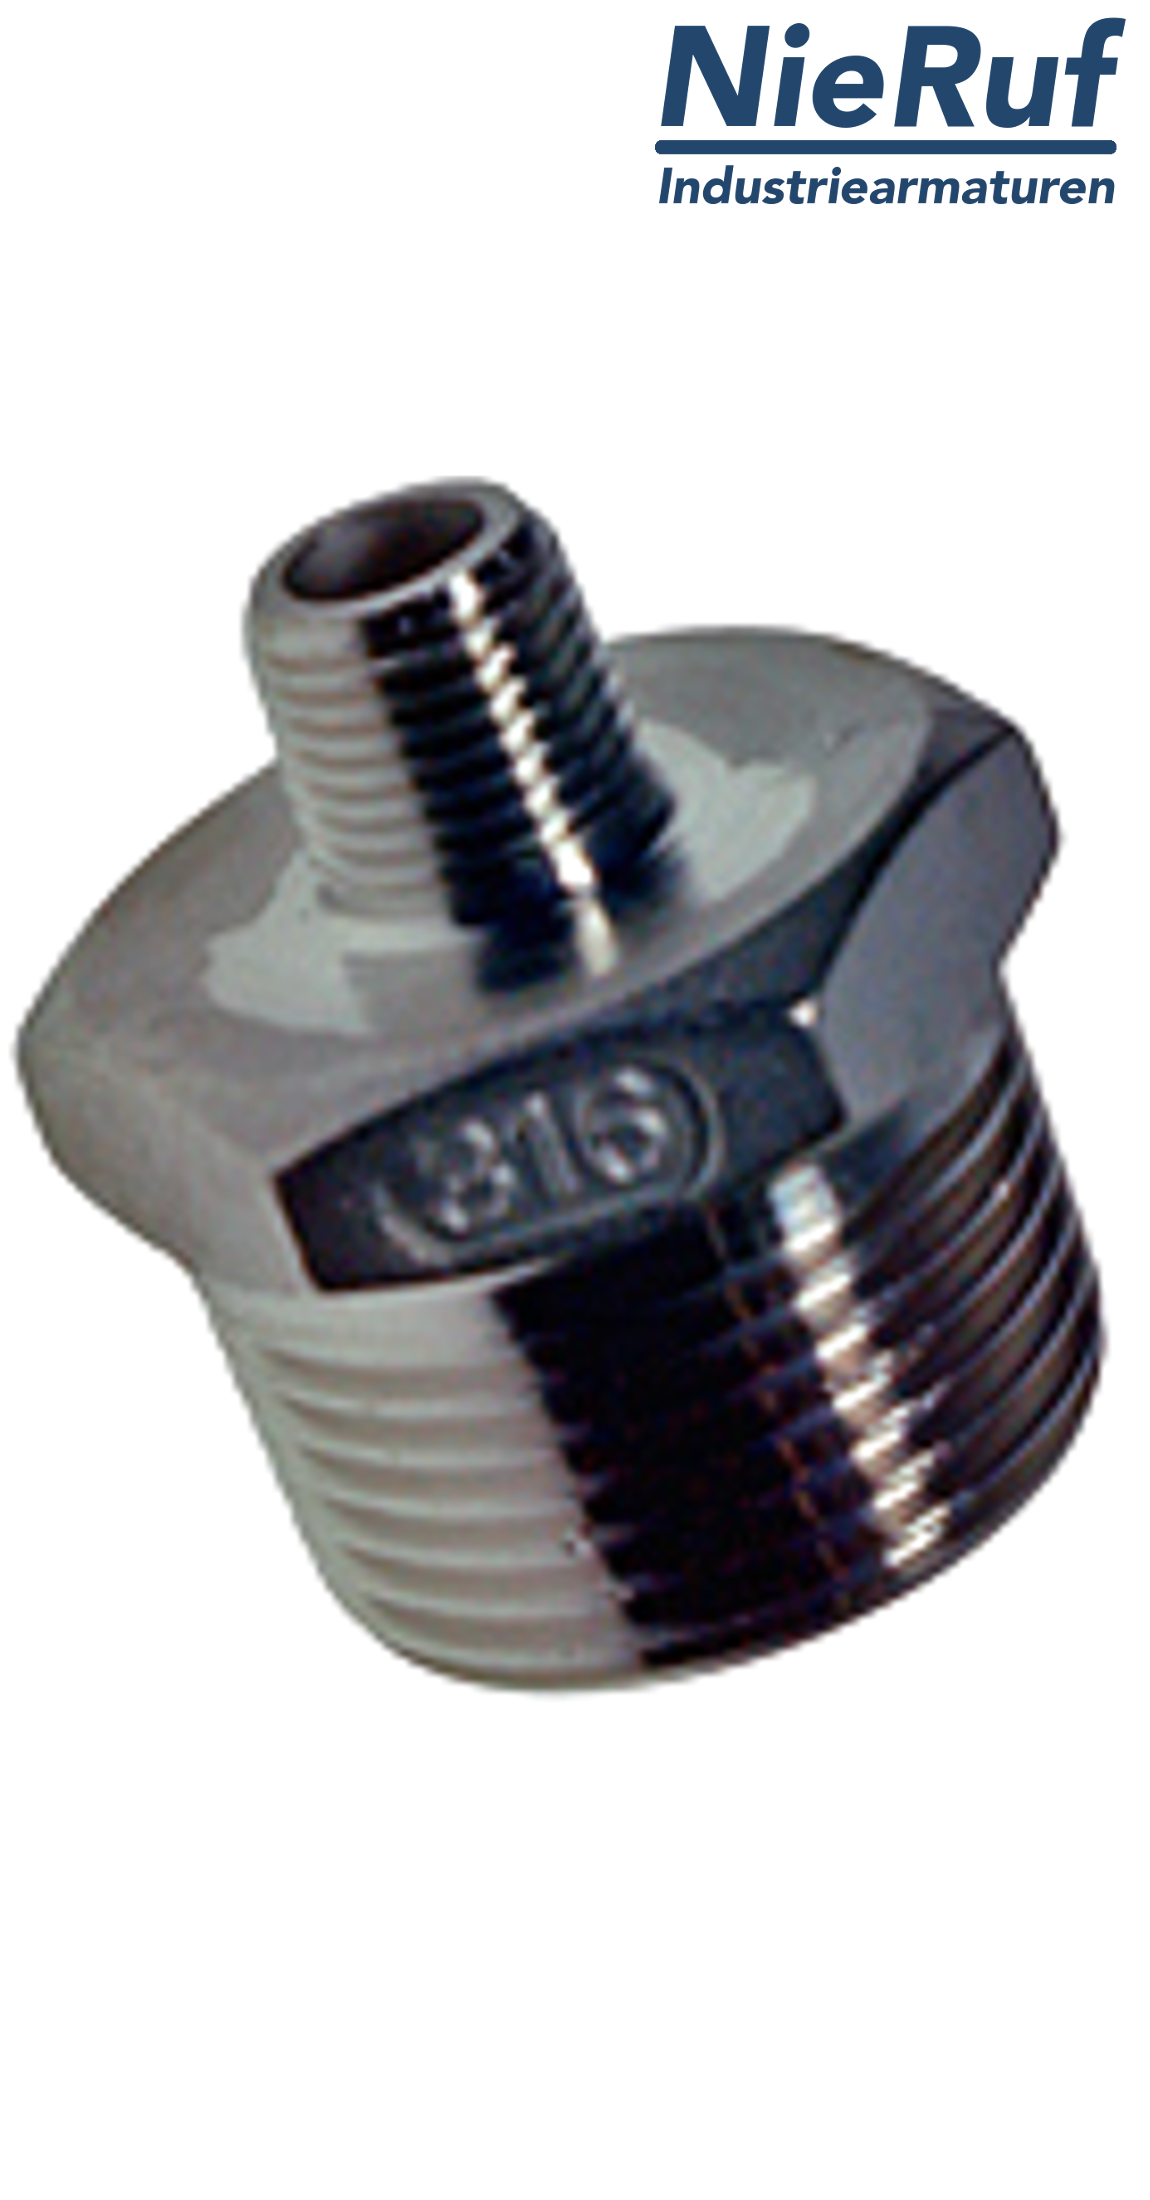 reducing nipple 1/4" x 1/8" inch NPT male stainless steel 316L